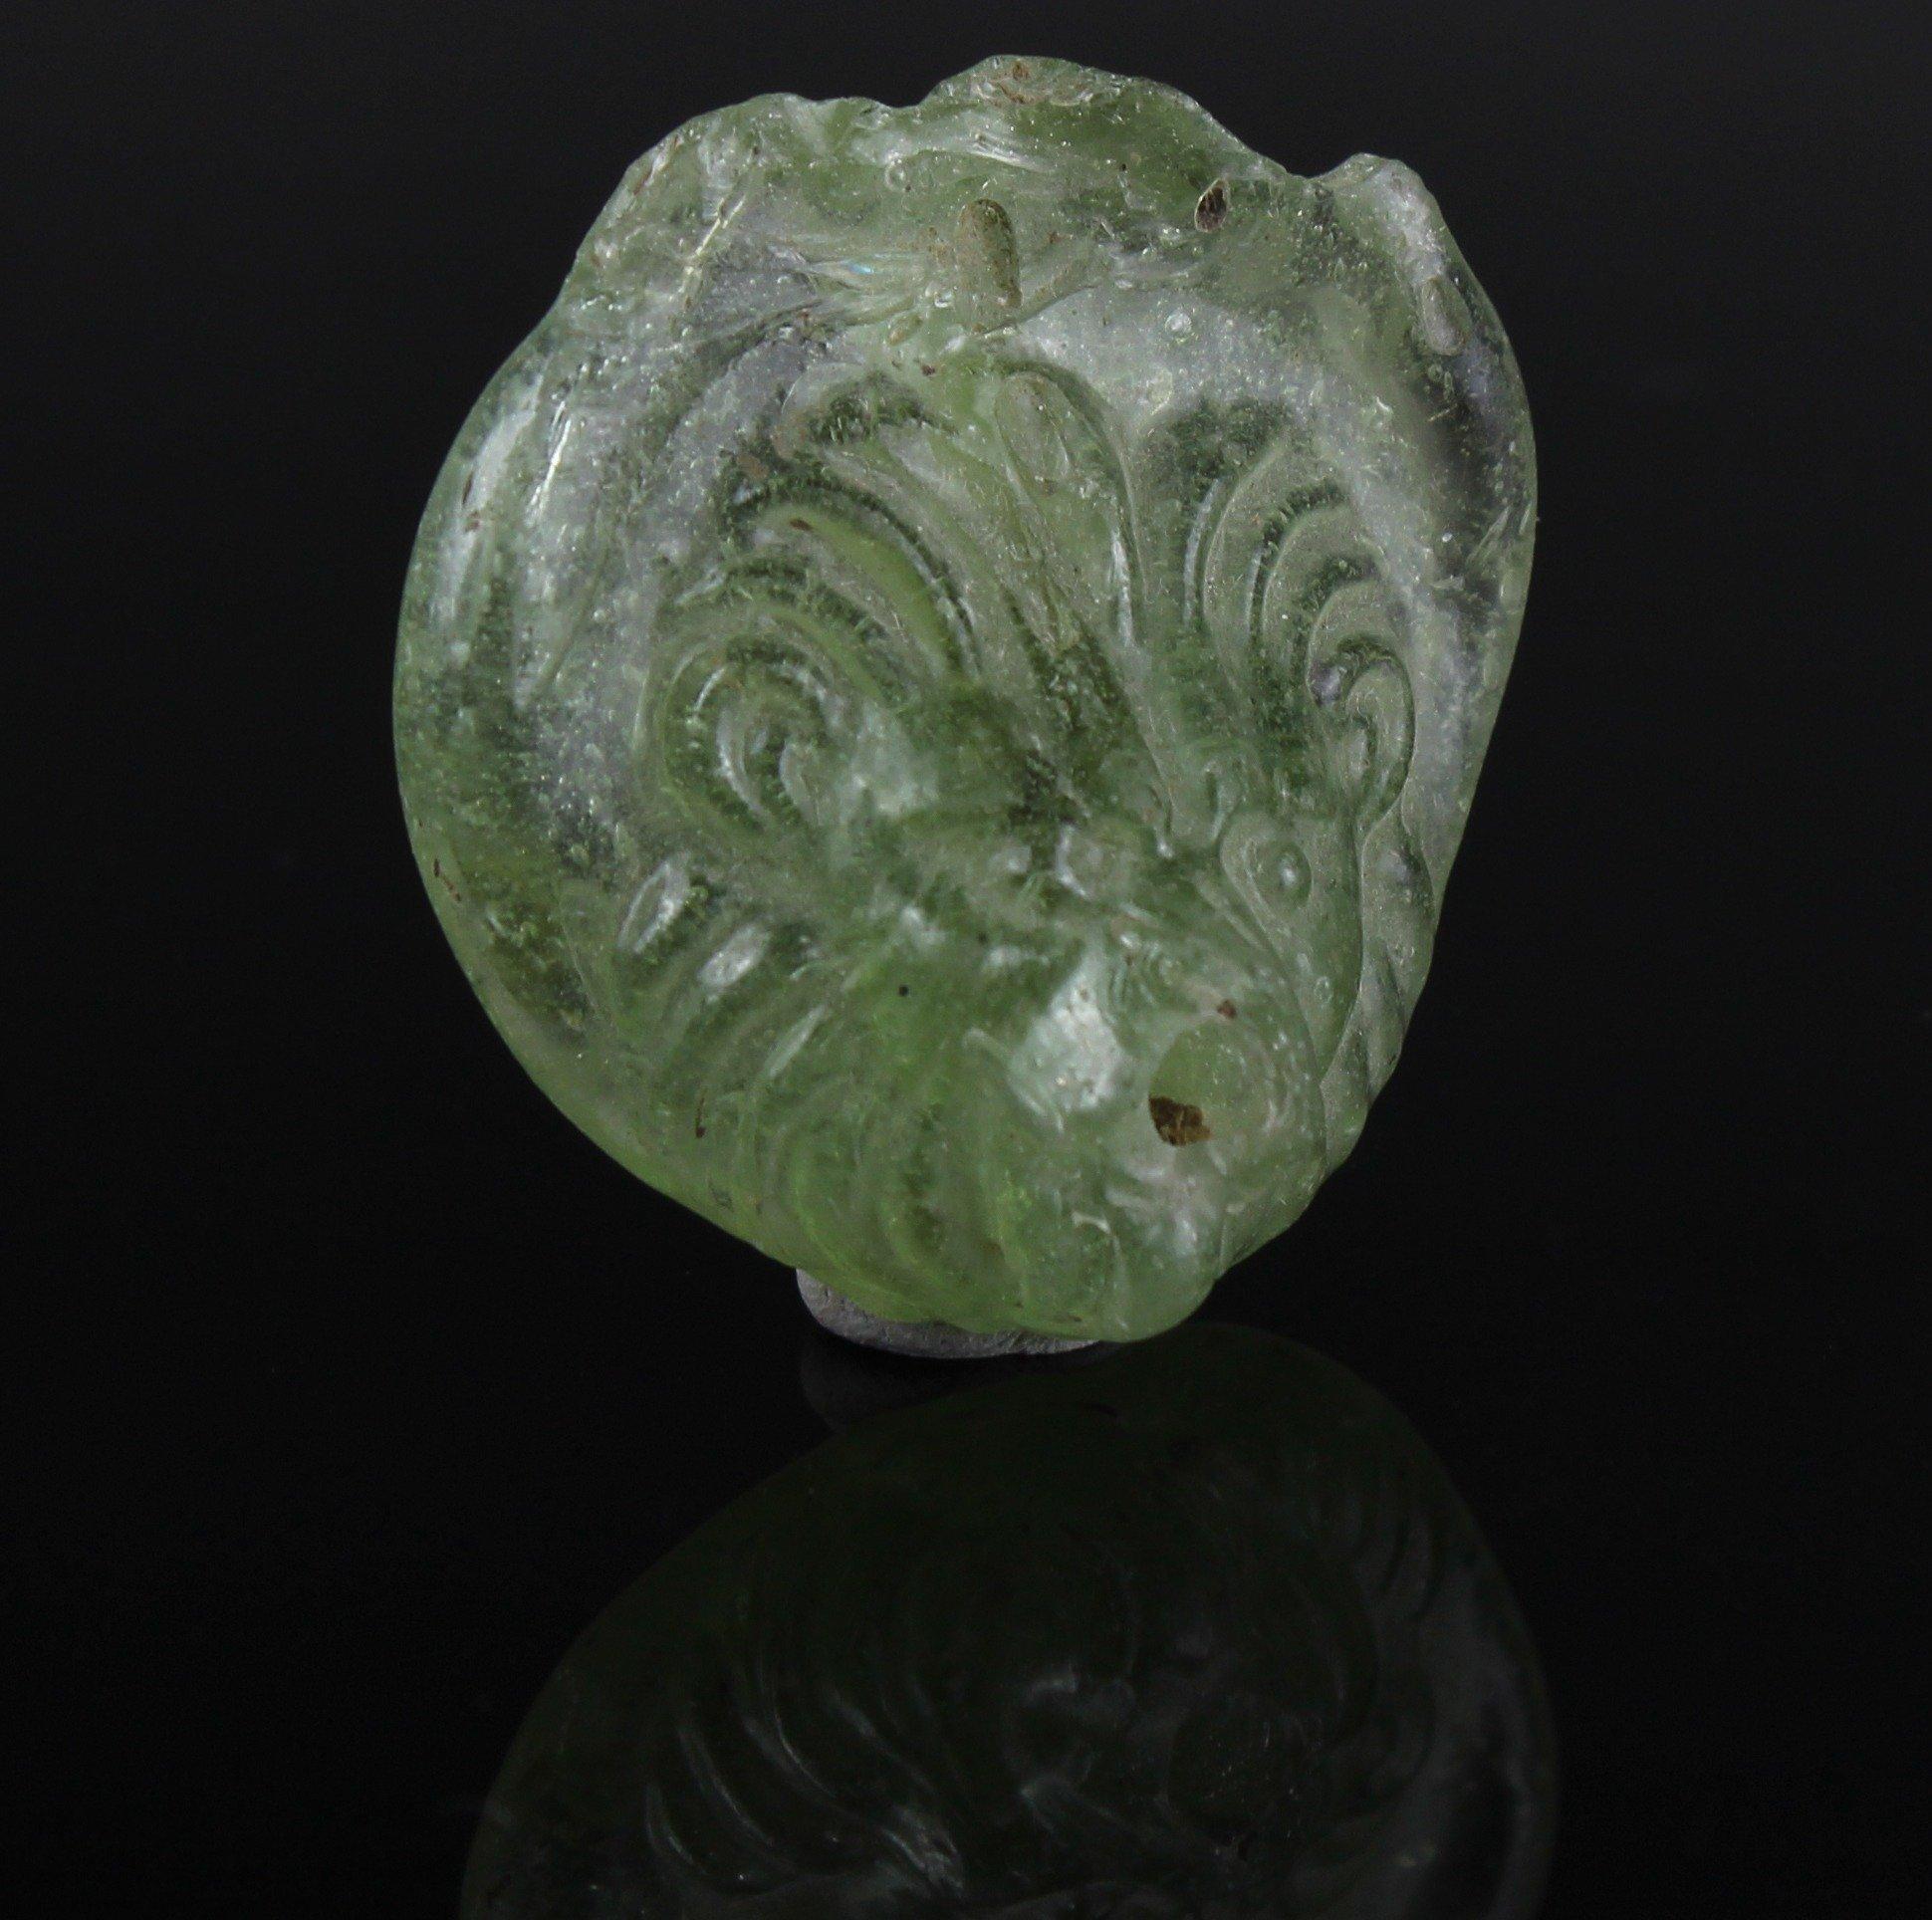 ITEM: Lion medallion
MATERIAL: Glass
CULTURE: Roman
PERIOD: 2nd – 3rd Century A.D
DIMENSIONS: 15 mm x 37 mm diameter
CONDITION: Good condition
PROVENANCE: Ex Shlomo Moussaieff collection, Herzliya Pituah, with export approval 55883
PARALLEL: CORNING